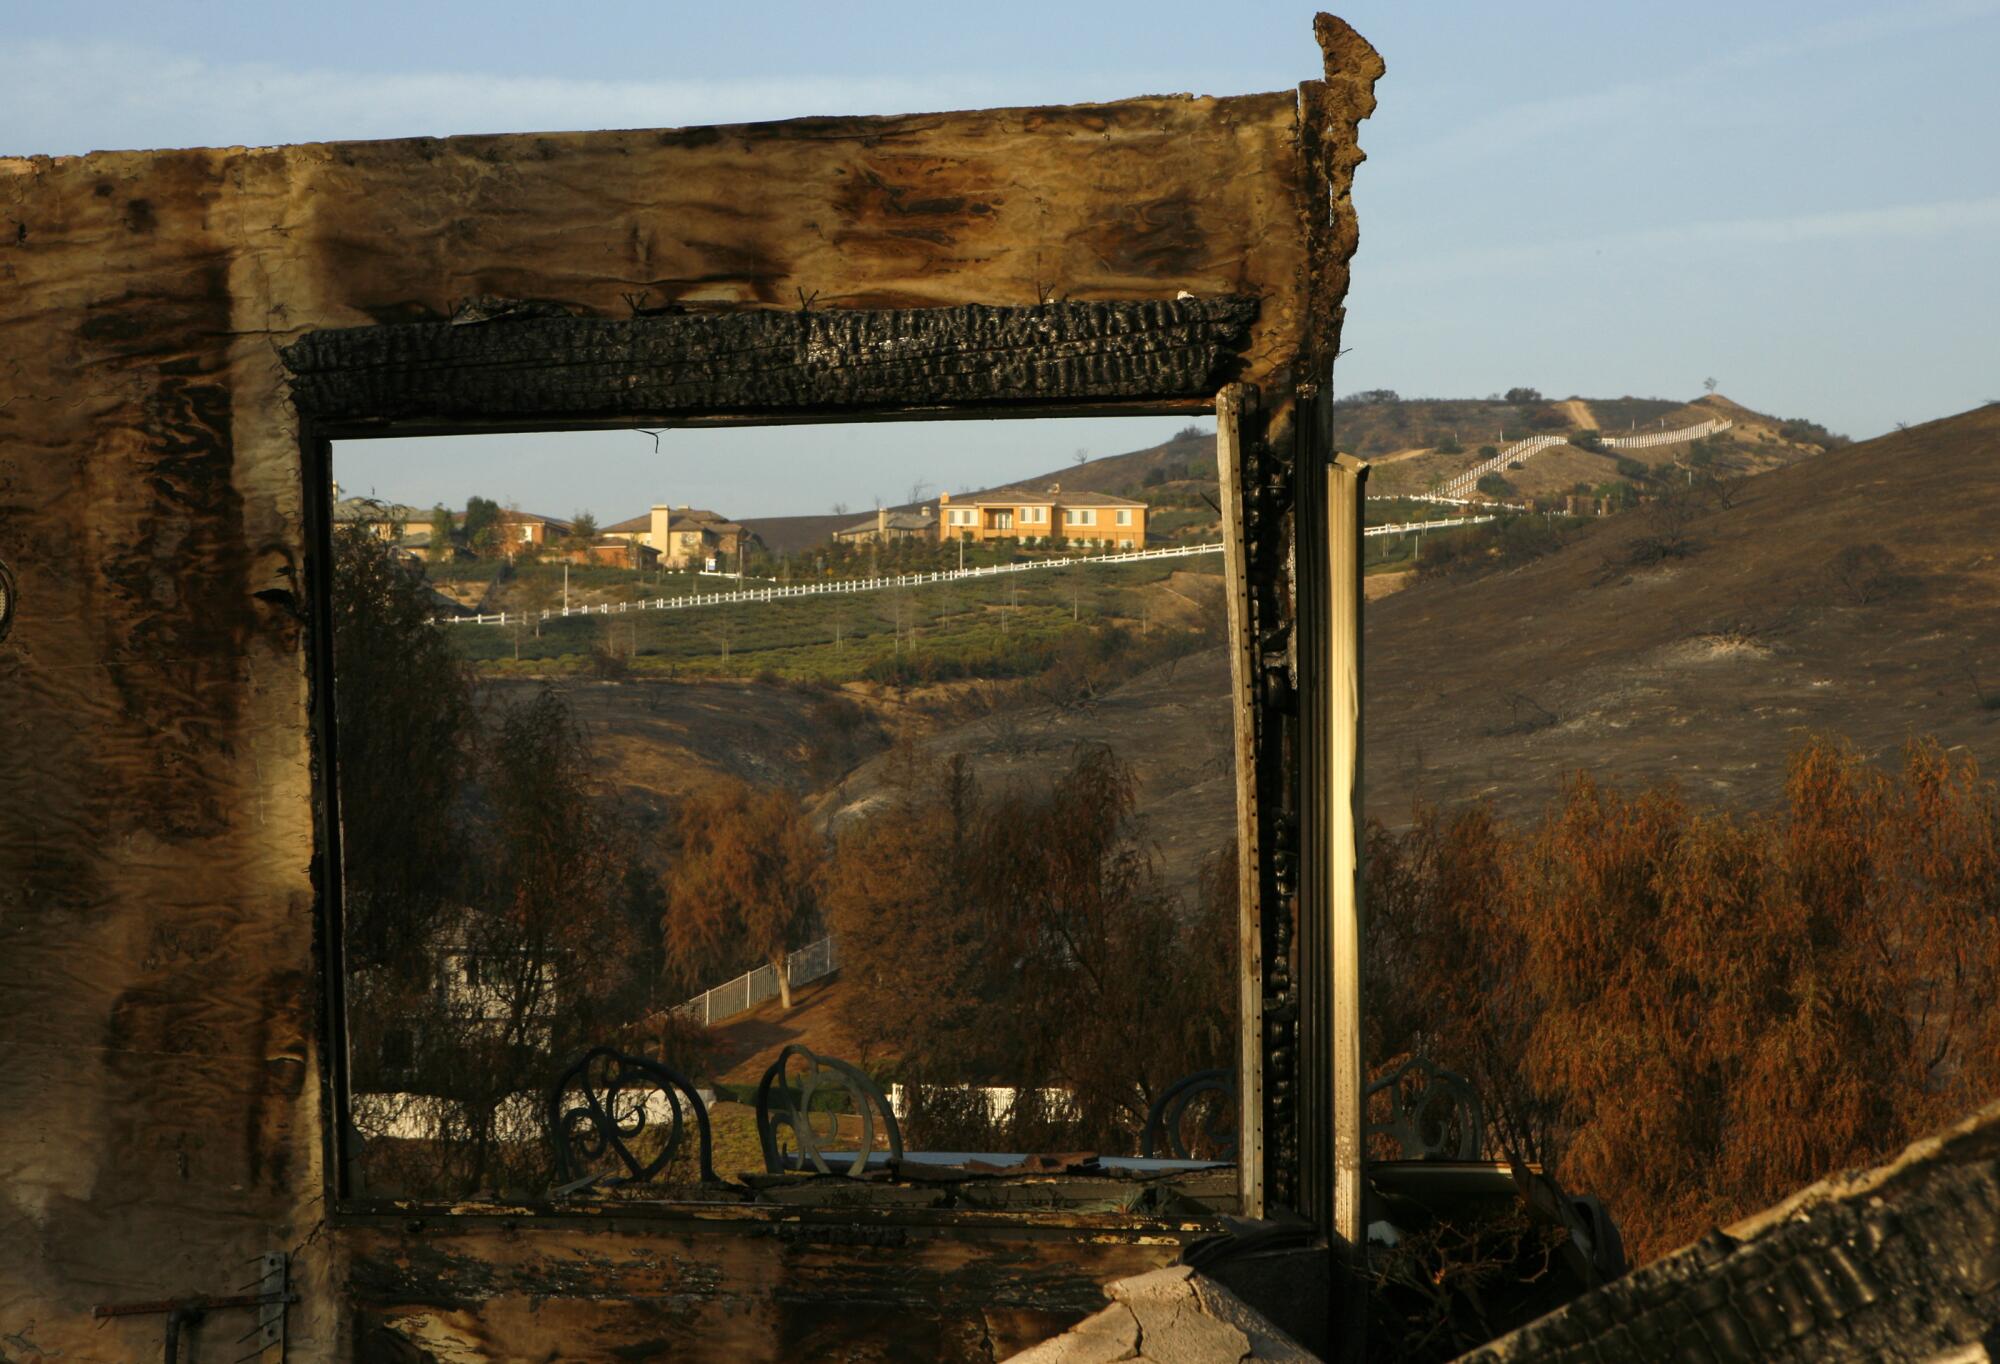 The aftermath of the Freeway Complex fire shows the burned walls of a house in Yorba Linda frame rolling hills.